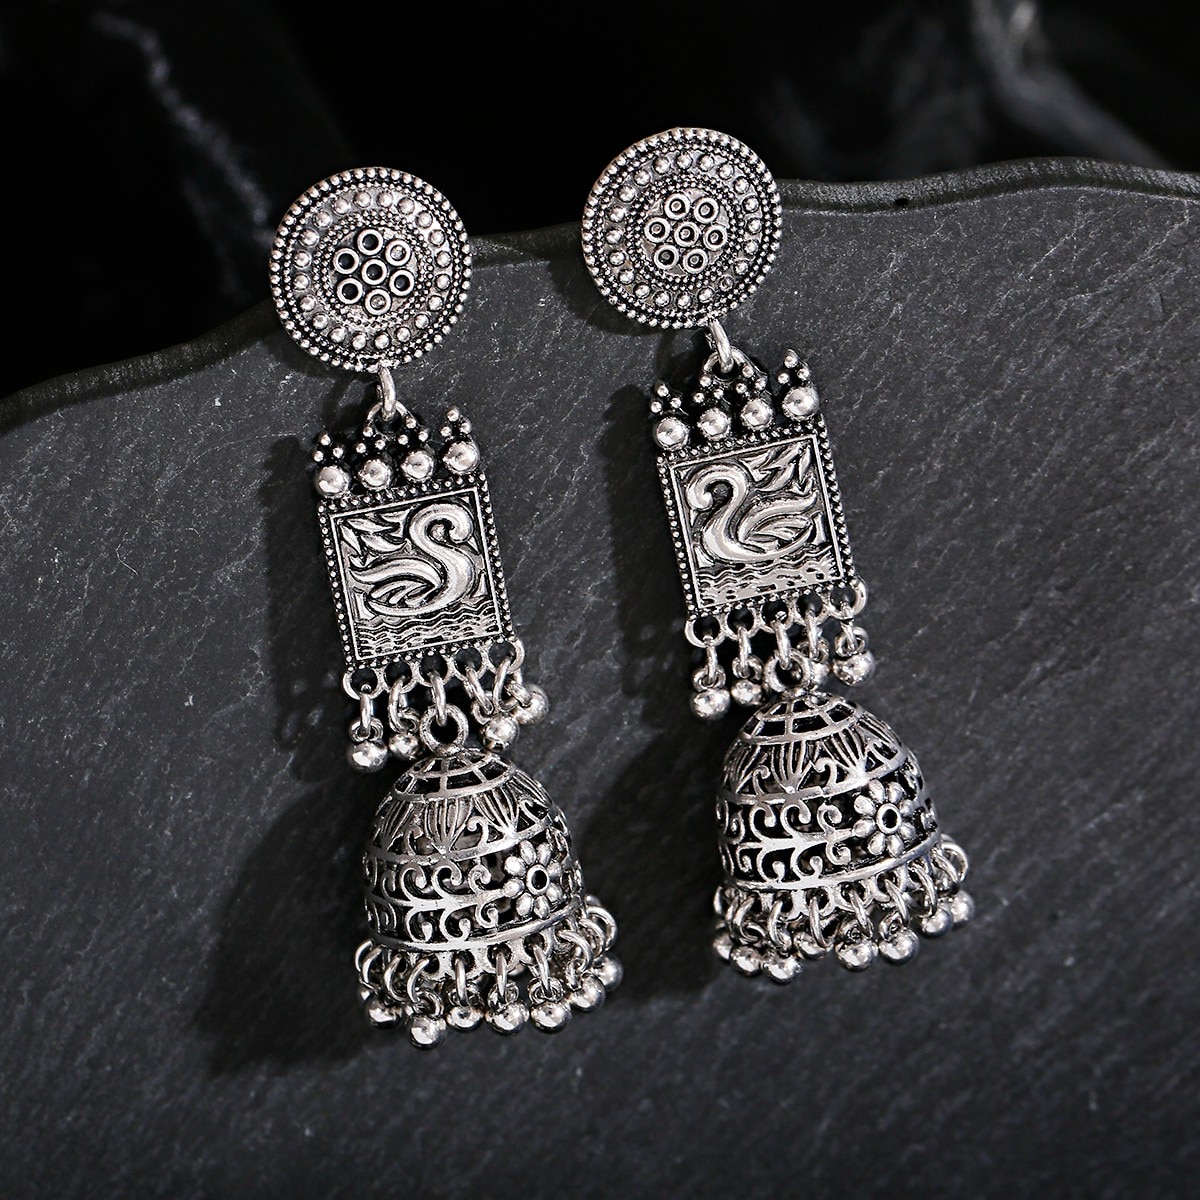 12-PairsLot-Boho-Afghan-Ethnic-Earrings-For-Women-Pendient-Pink-Gold-Silver-Color-Bell-Ladies-Indian-3256803995211369-5